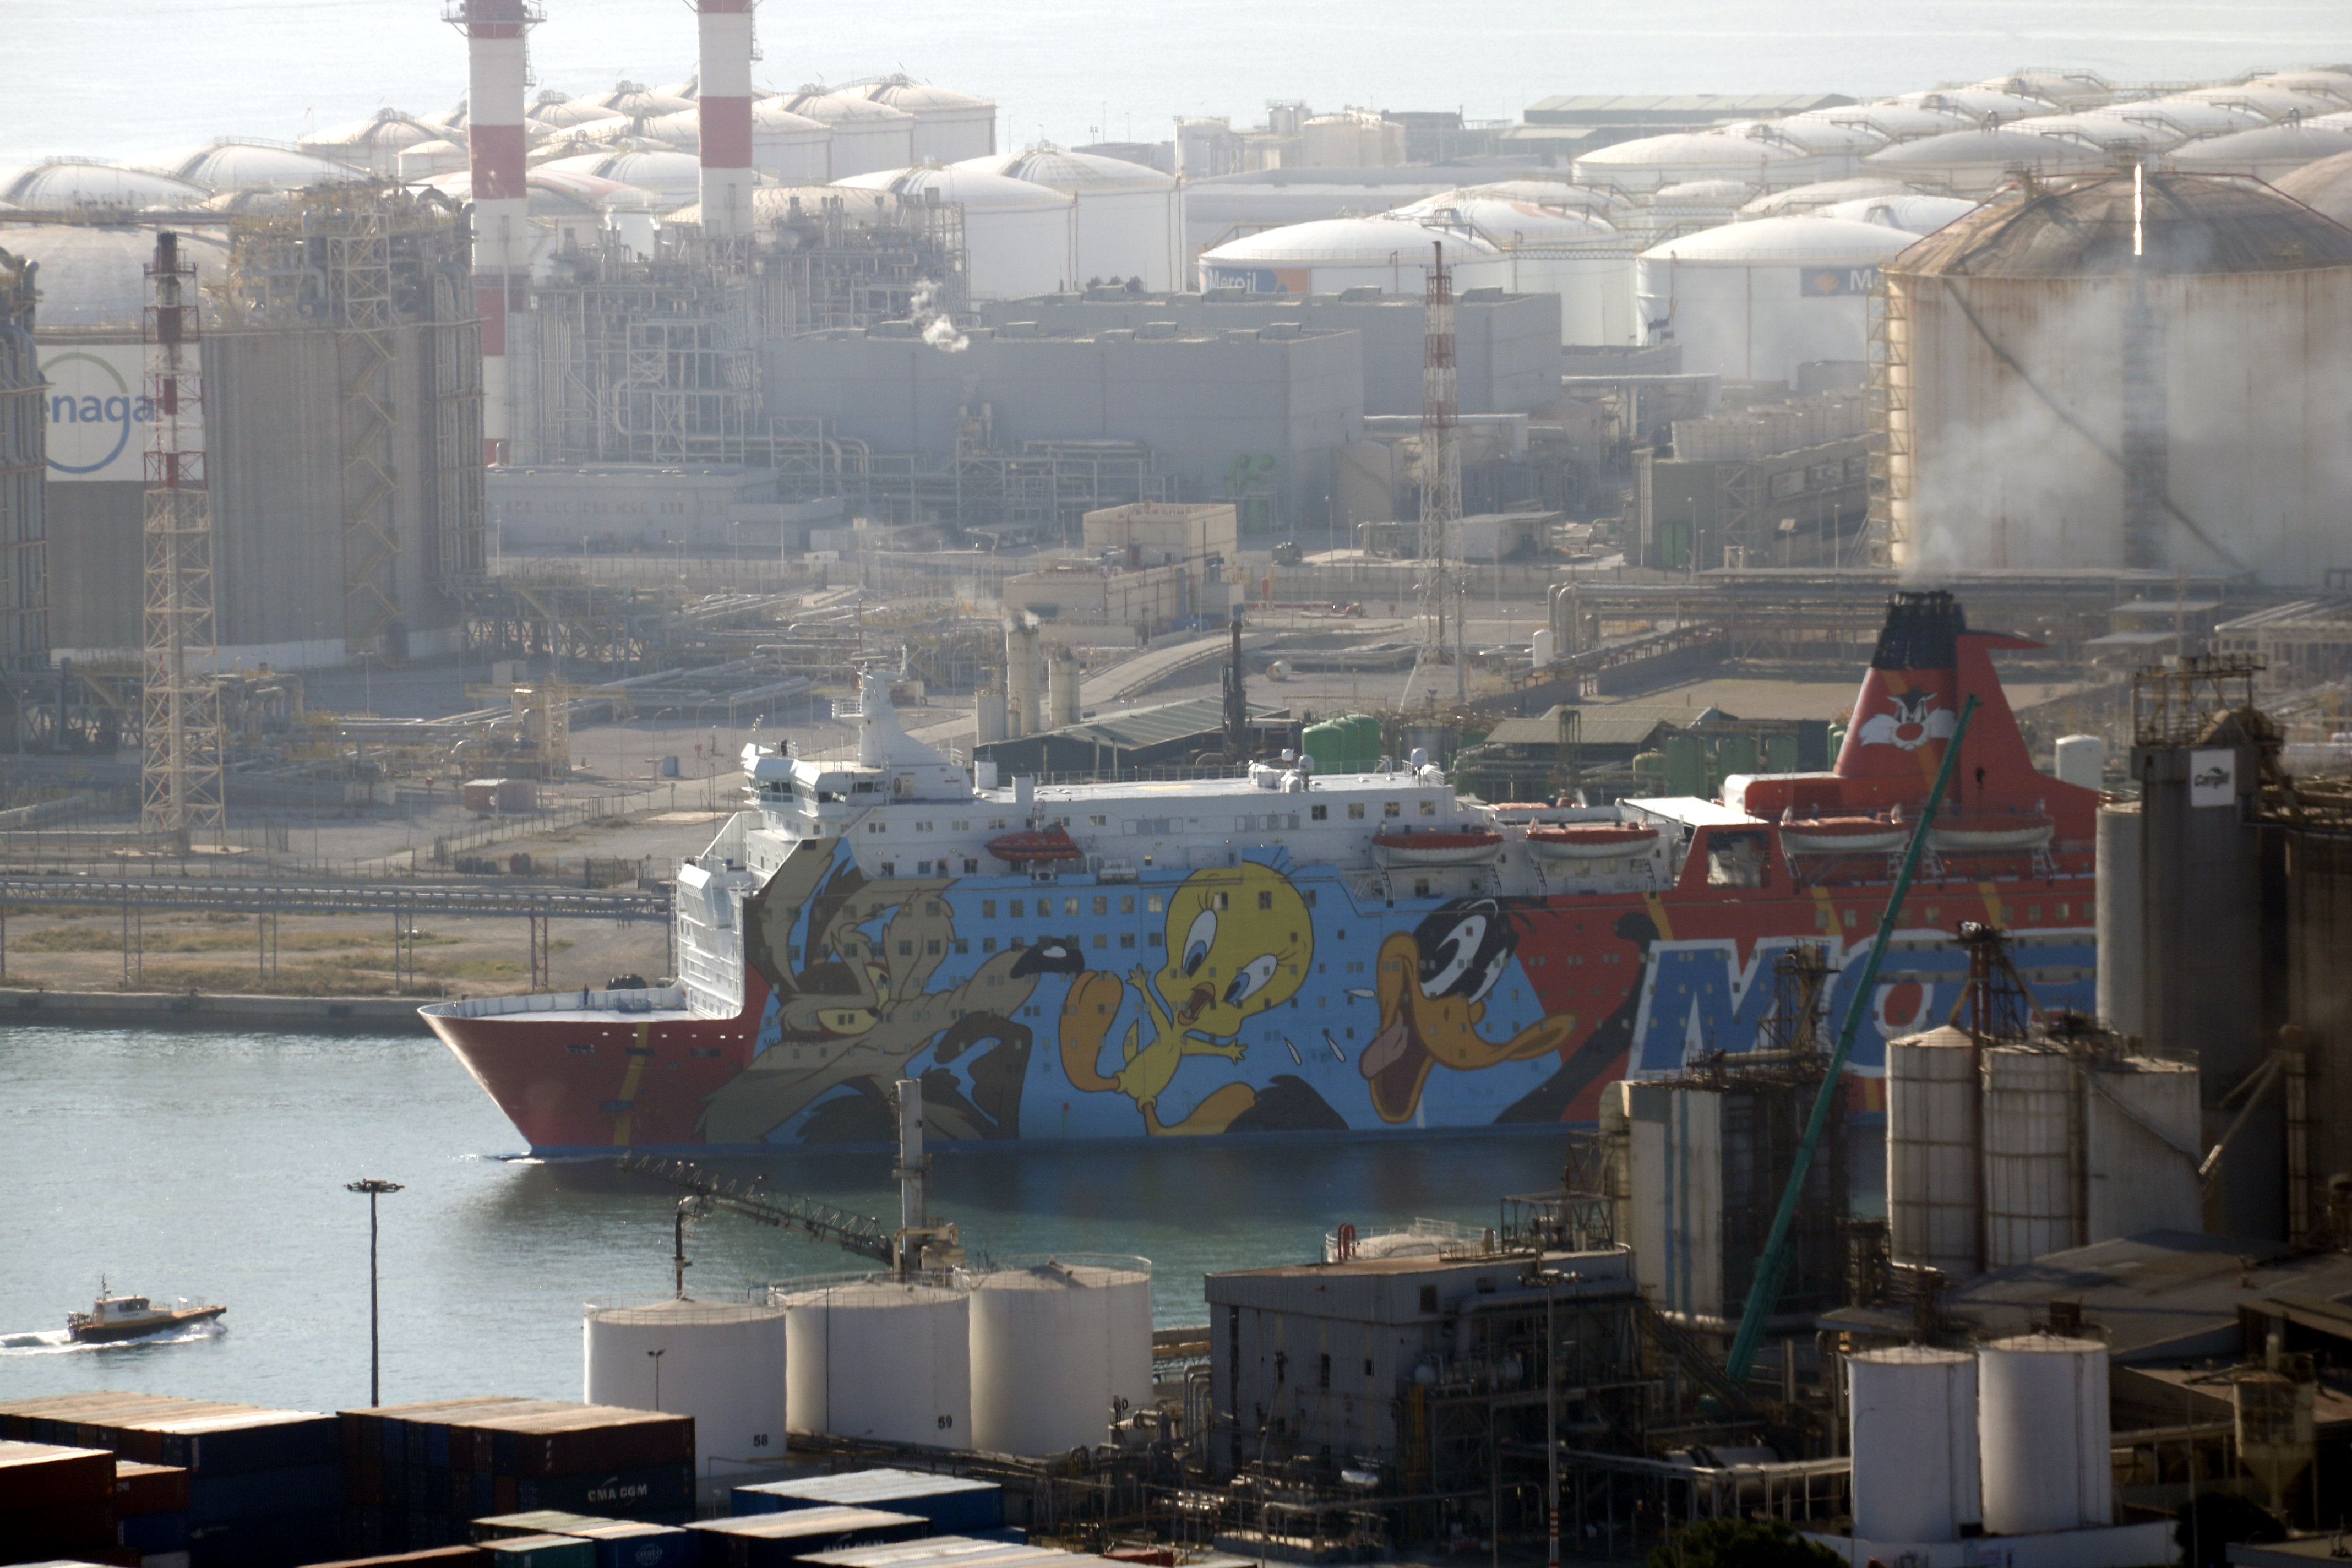 The 'Tweetie Pie' ship leaving Barcelona port (by ACN)